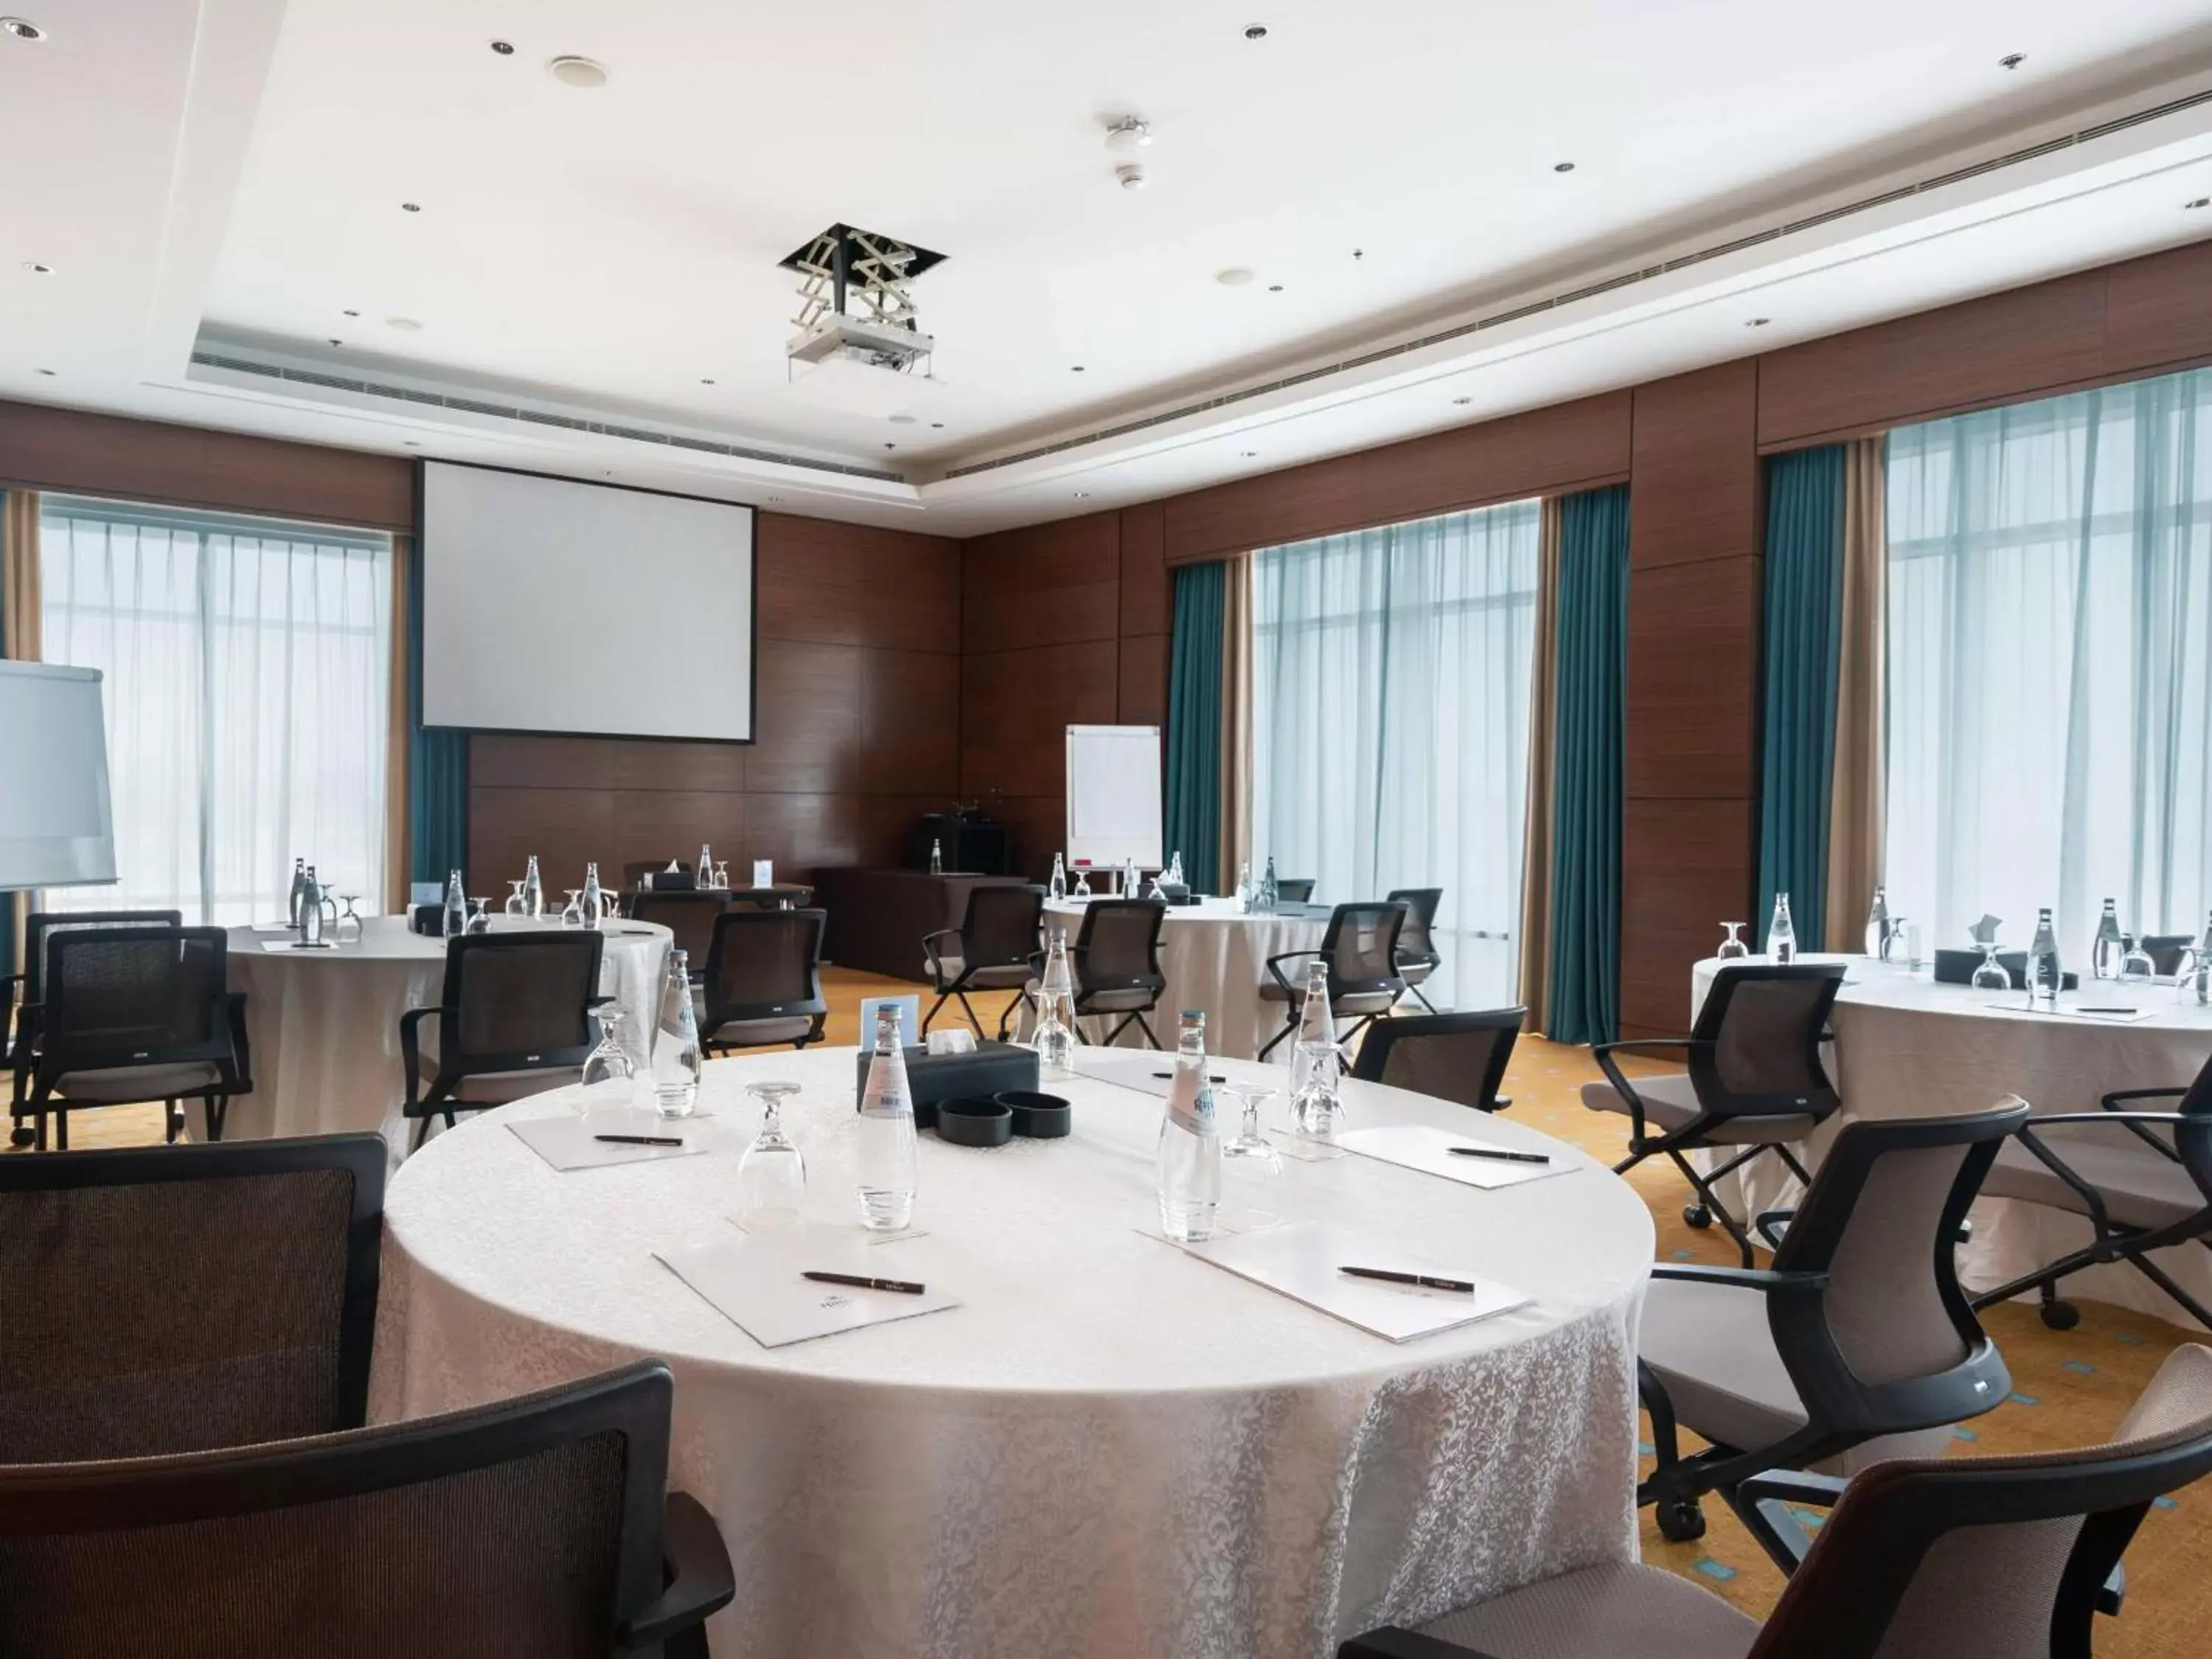 Meeting/conference room in Hilton Doha